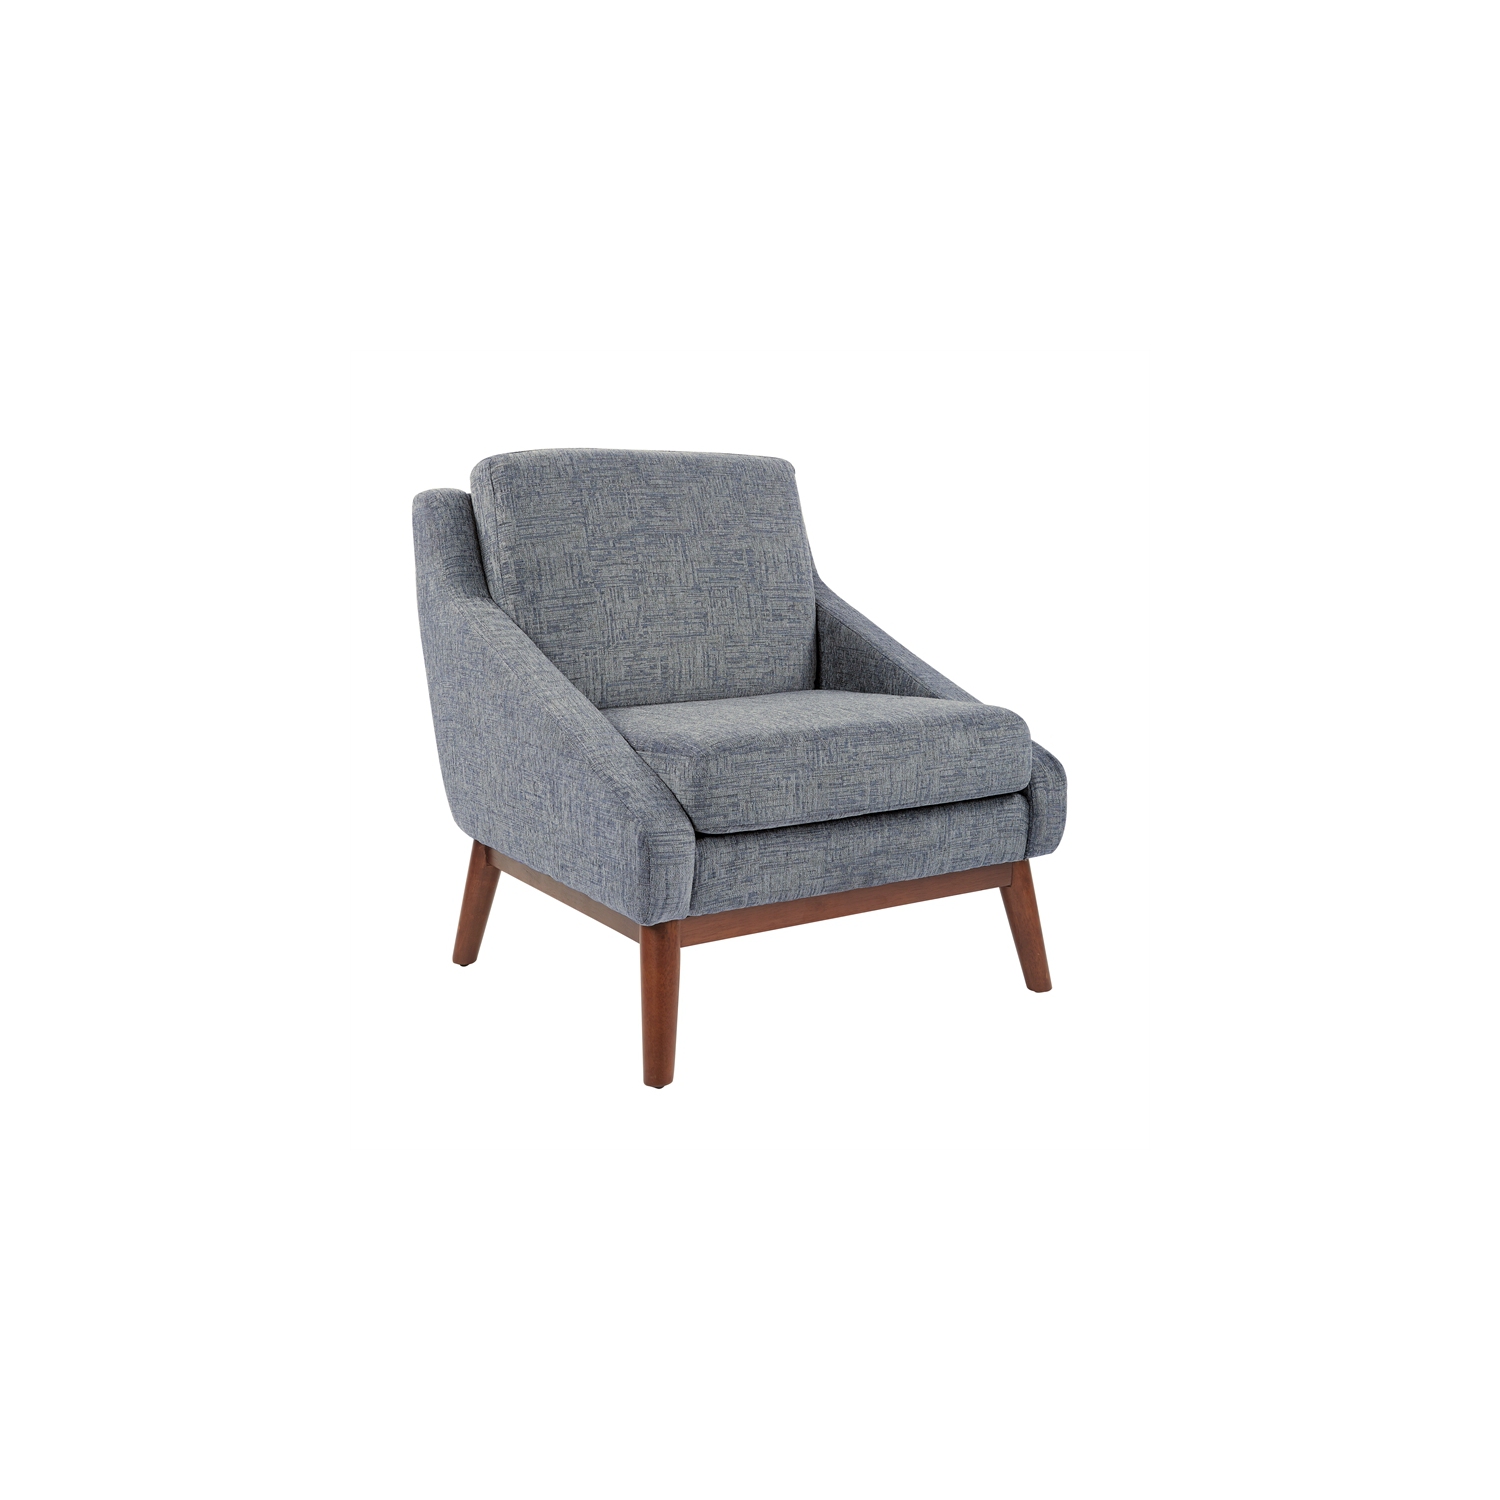 OSP Home Furnishings Davenport Chair in Navy Fabric with Coffee Finish Legs K/D